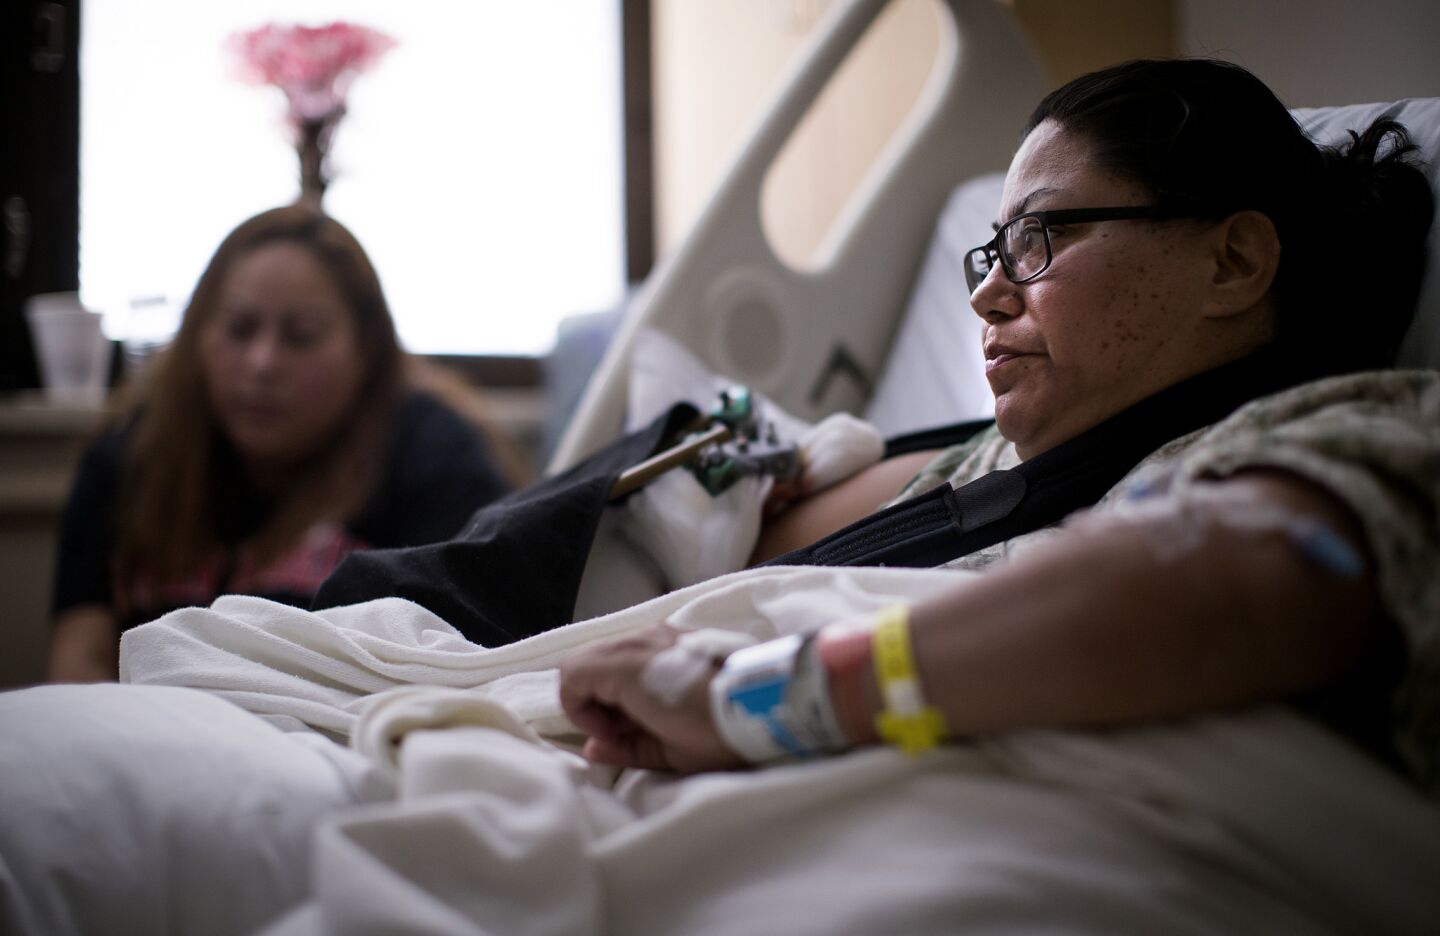 Shooting victim Paola Bautista, 39, right, of Fontana with her sister Daisy, 34, recounts her experience of running and hiding once they heard gunshots while attending the country music festival. Bautista was shot in the forearm and will require additional surgeries. She and her sister hid in a maintenance trailer for more than 3 hours.